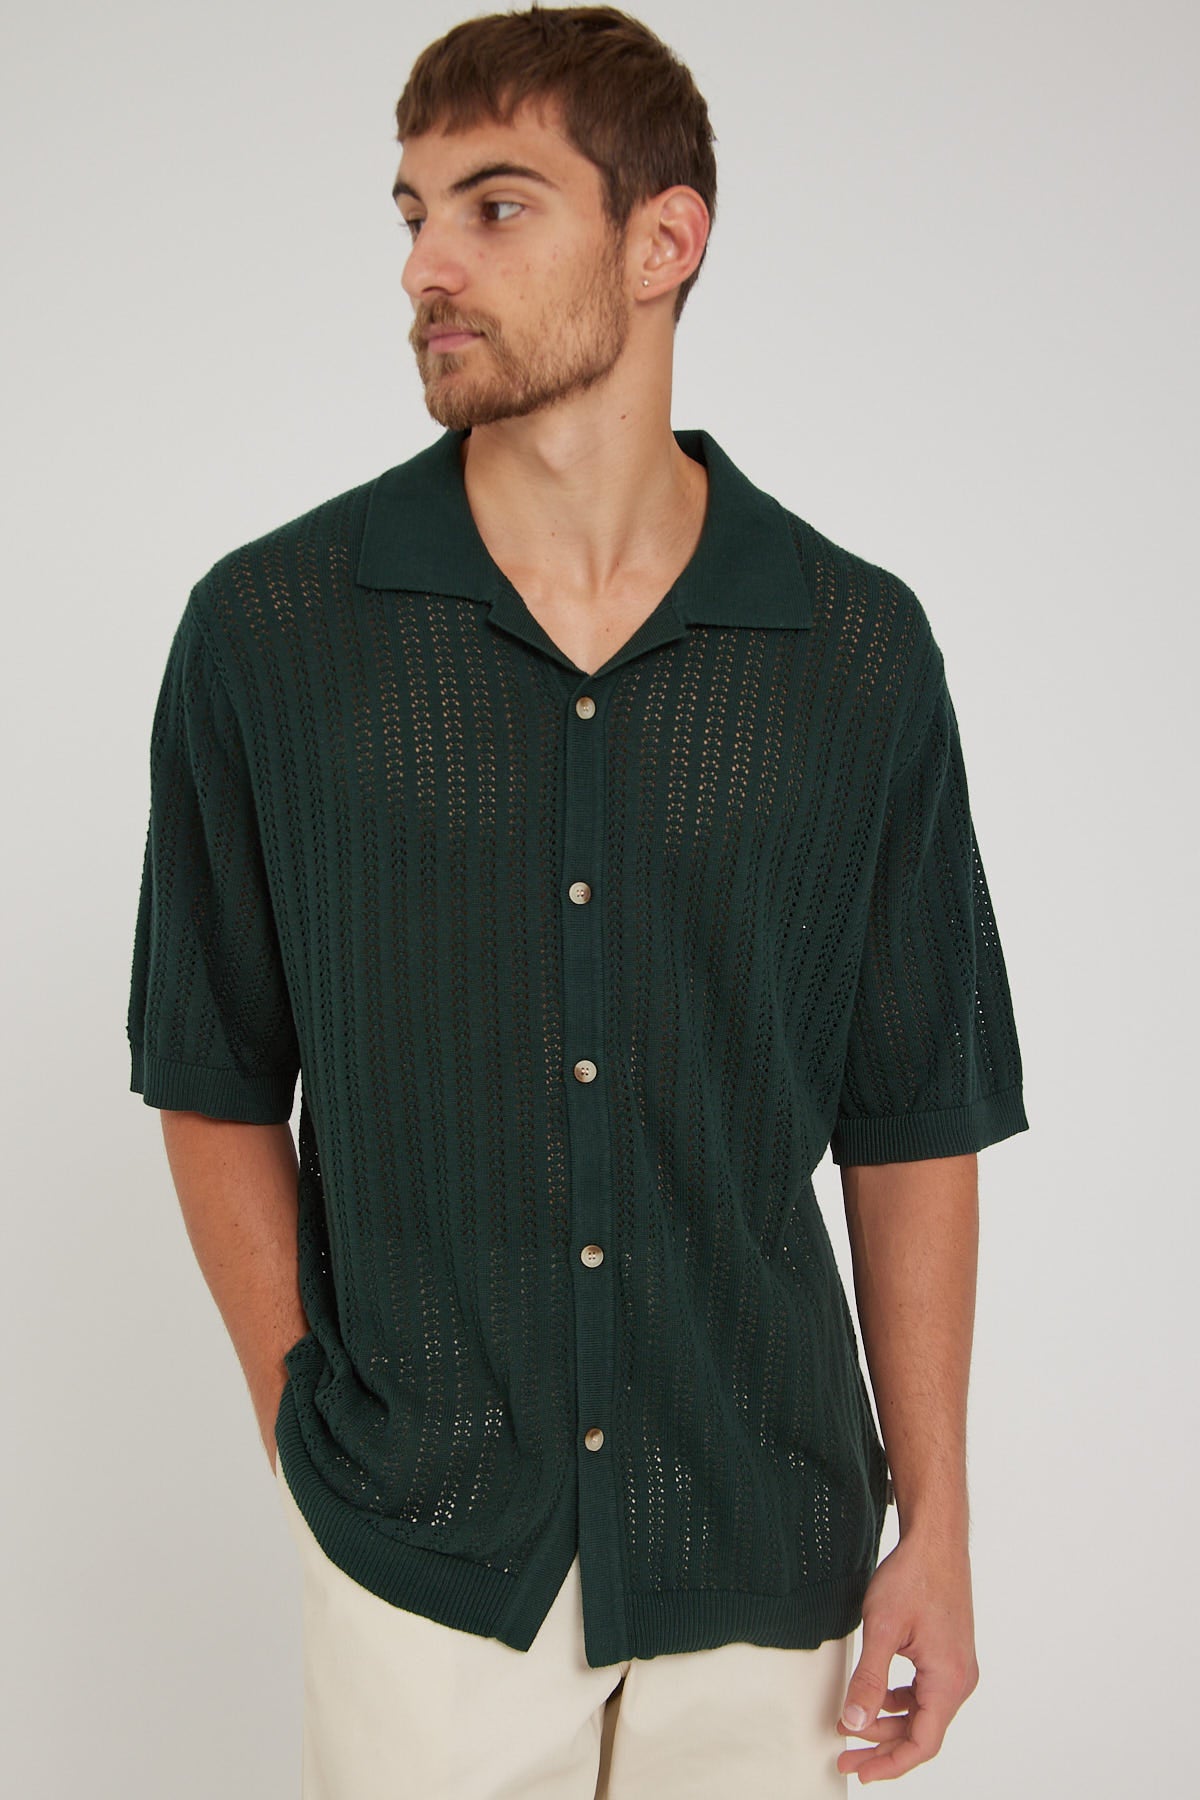 Rolla's Bowler Knit Shirt Thyme – Universal Store